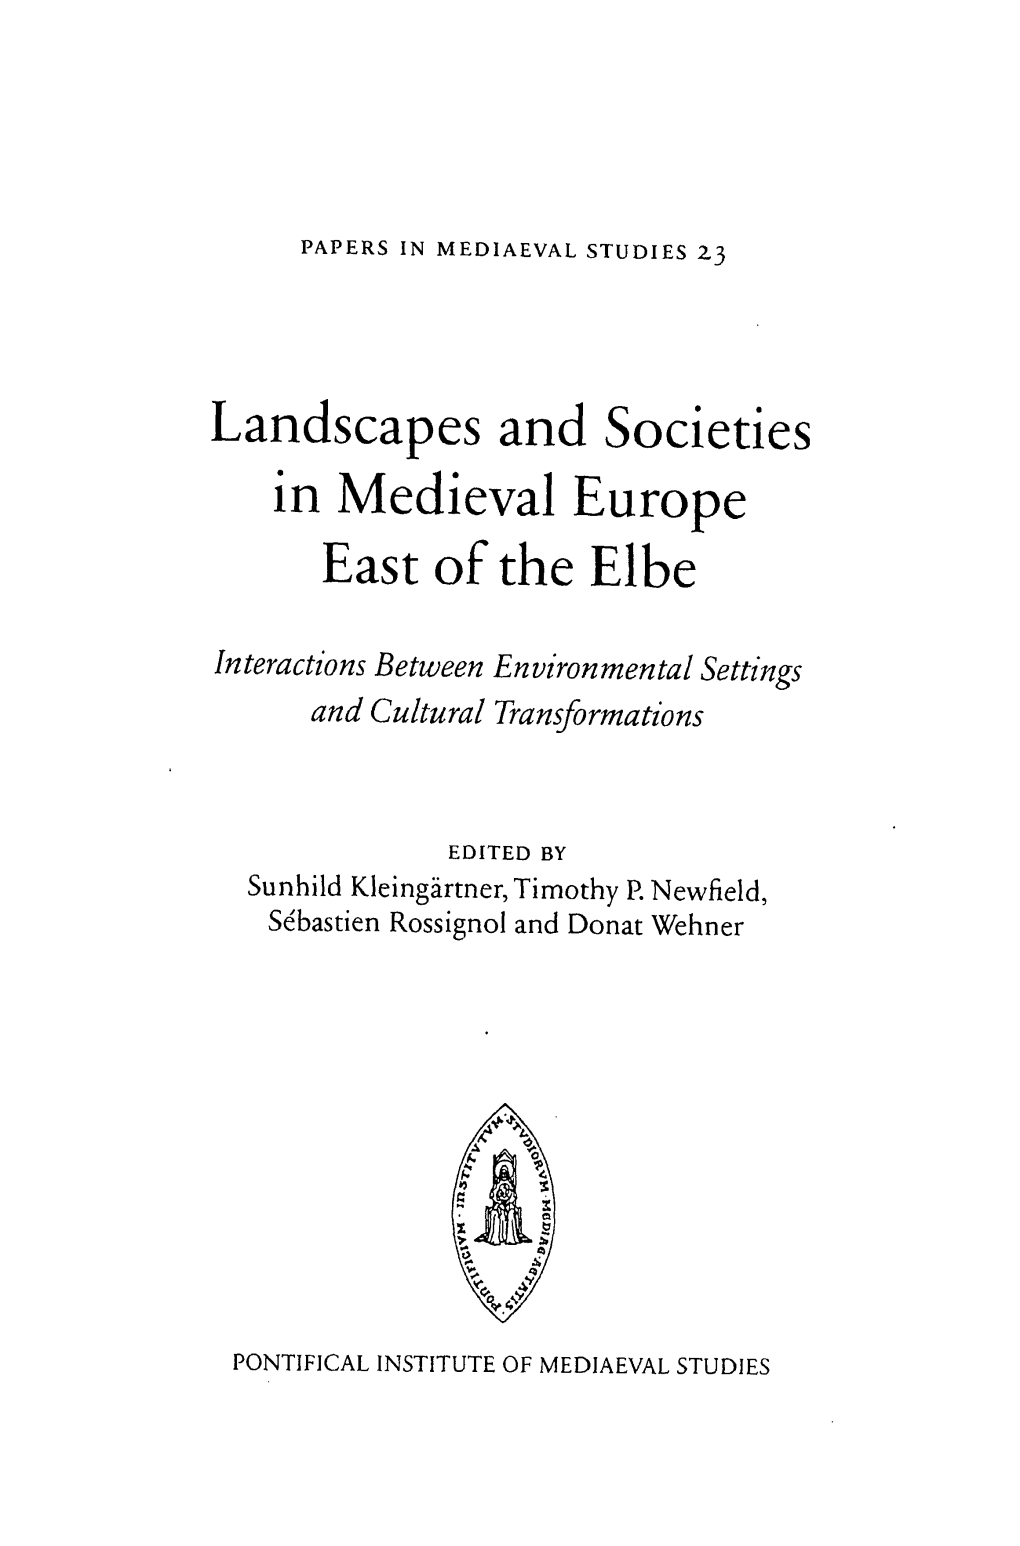 Landscapes and Societies in Medieval Europe East of the Elbe